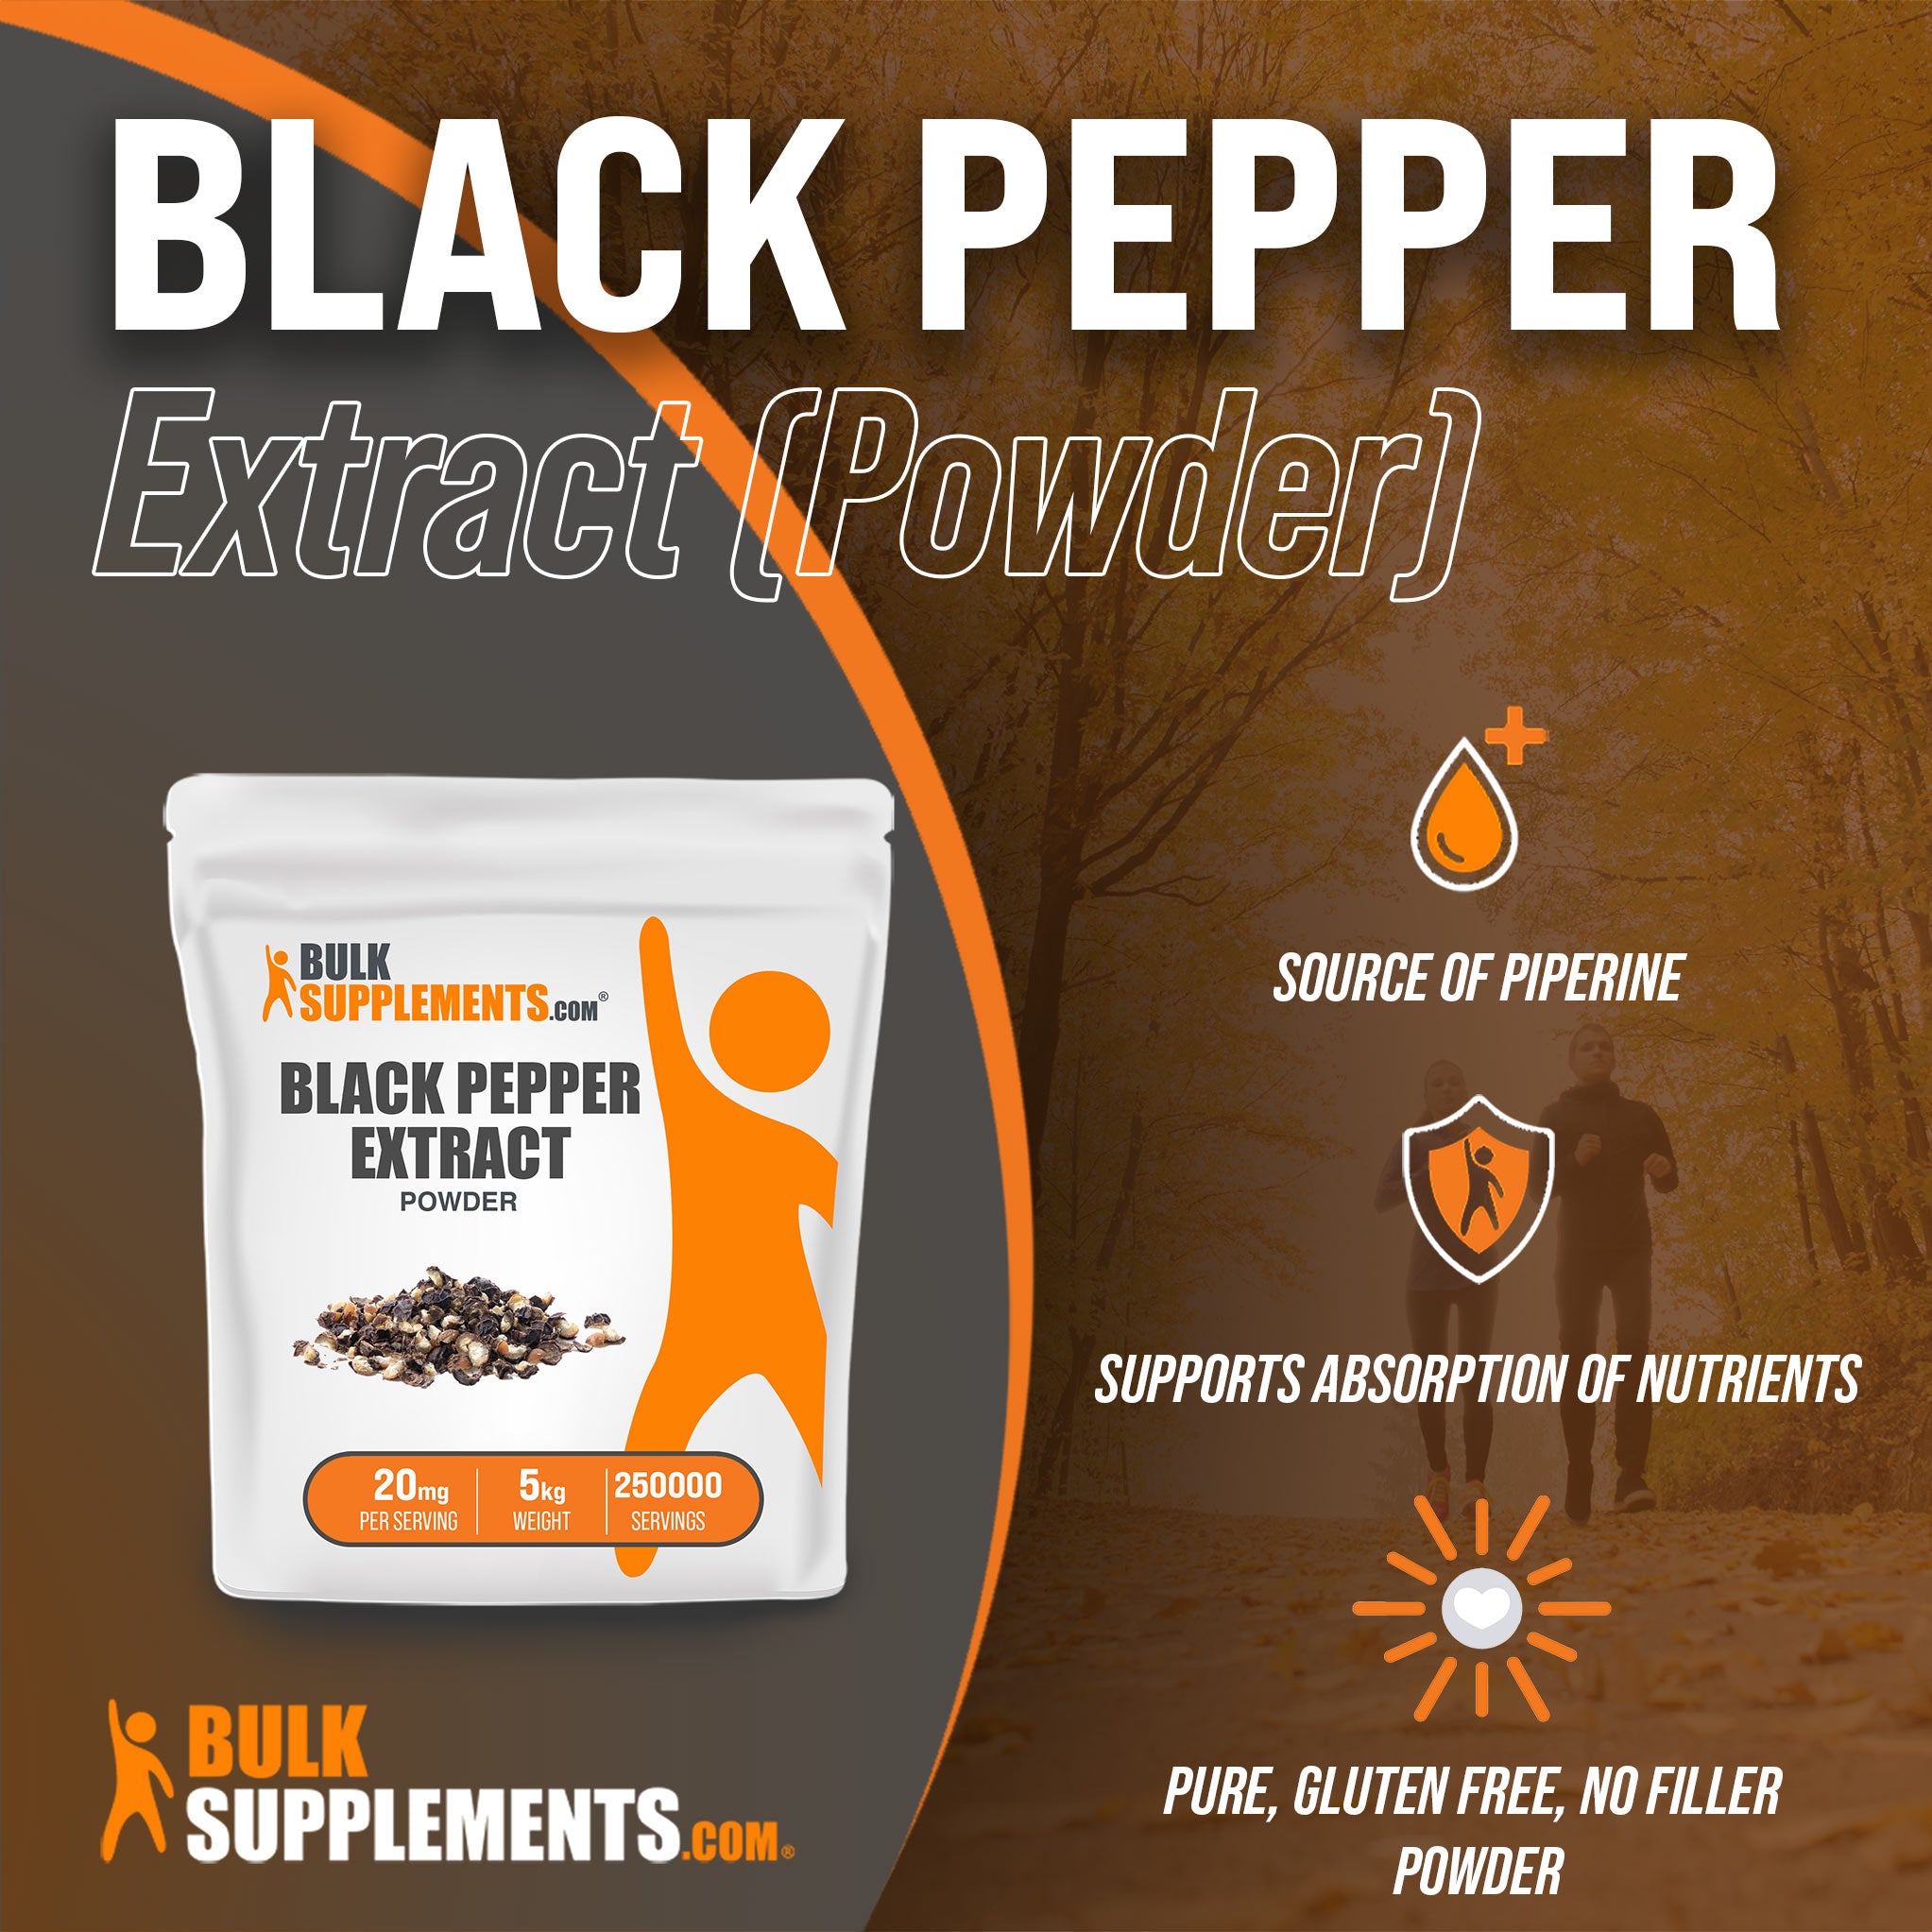 5kg bags of black pepper extract are a great source of piperine